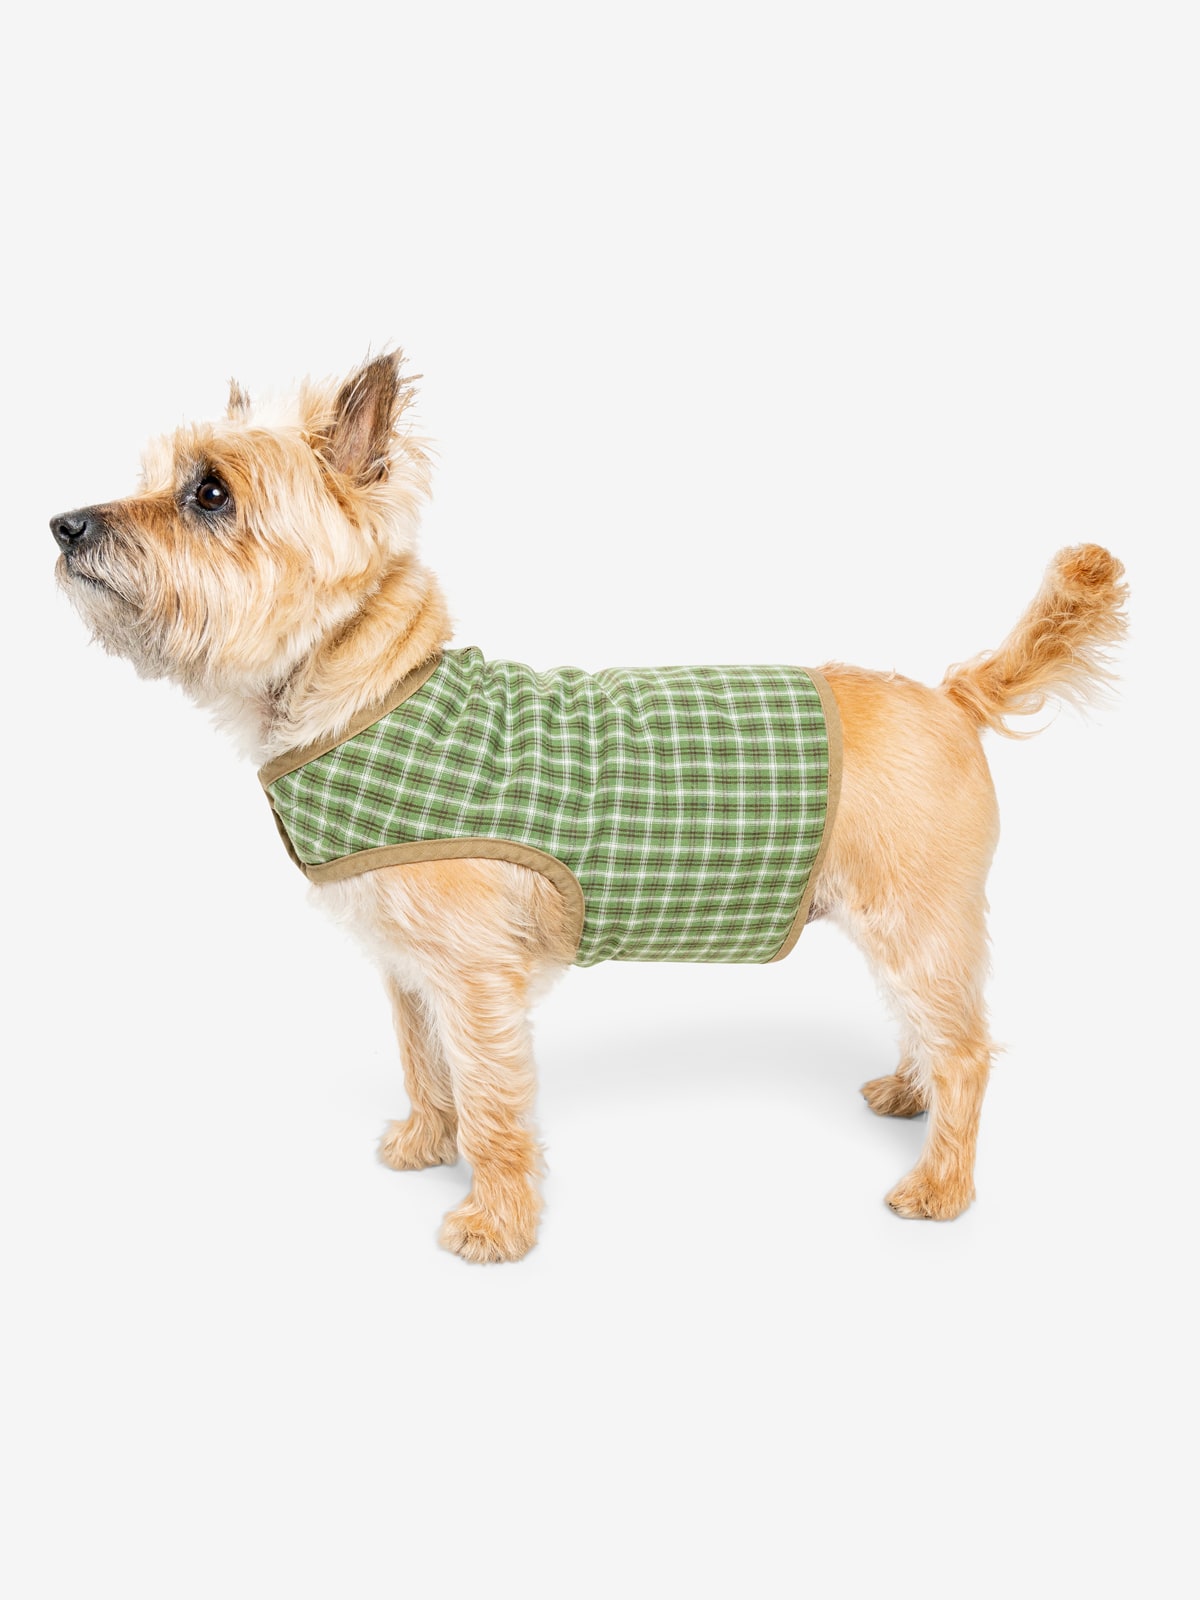 Insect Shield® Dog Clothes: Protect Against Ticks, Mosquitoes, Fleas